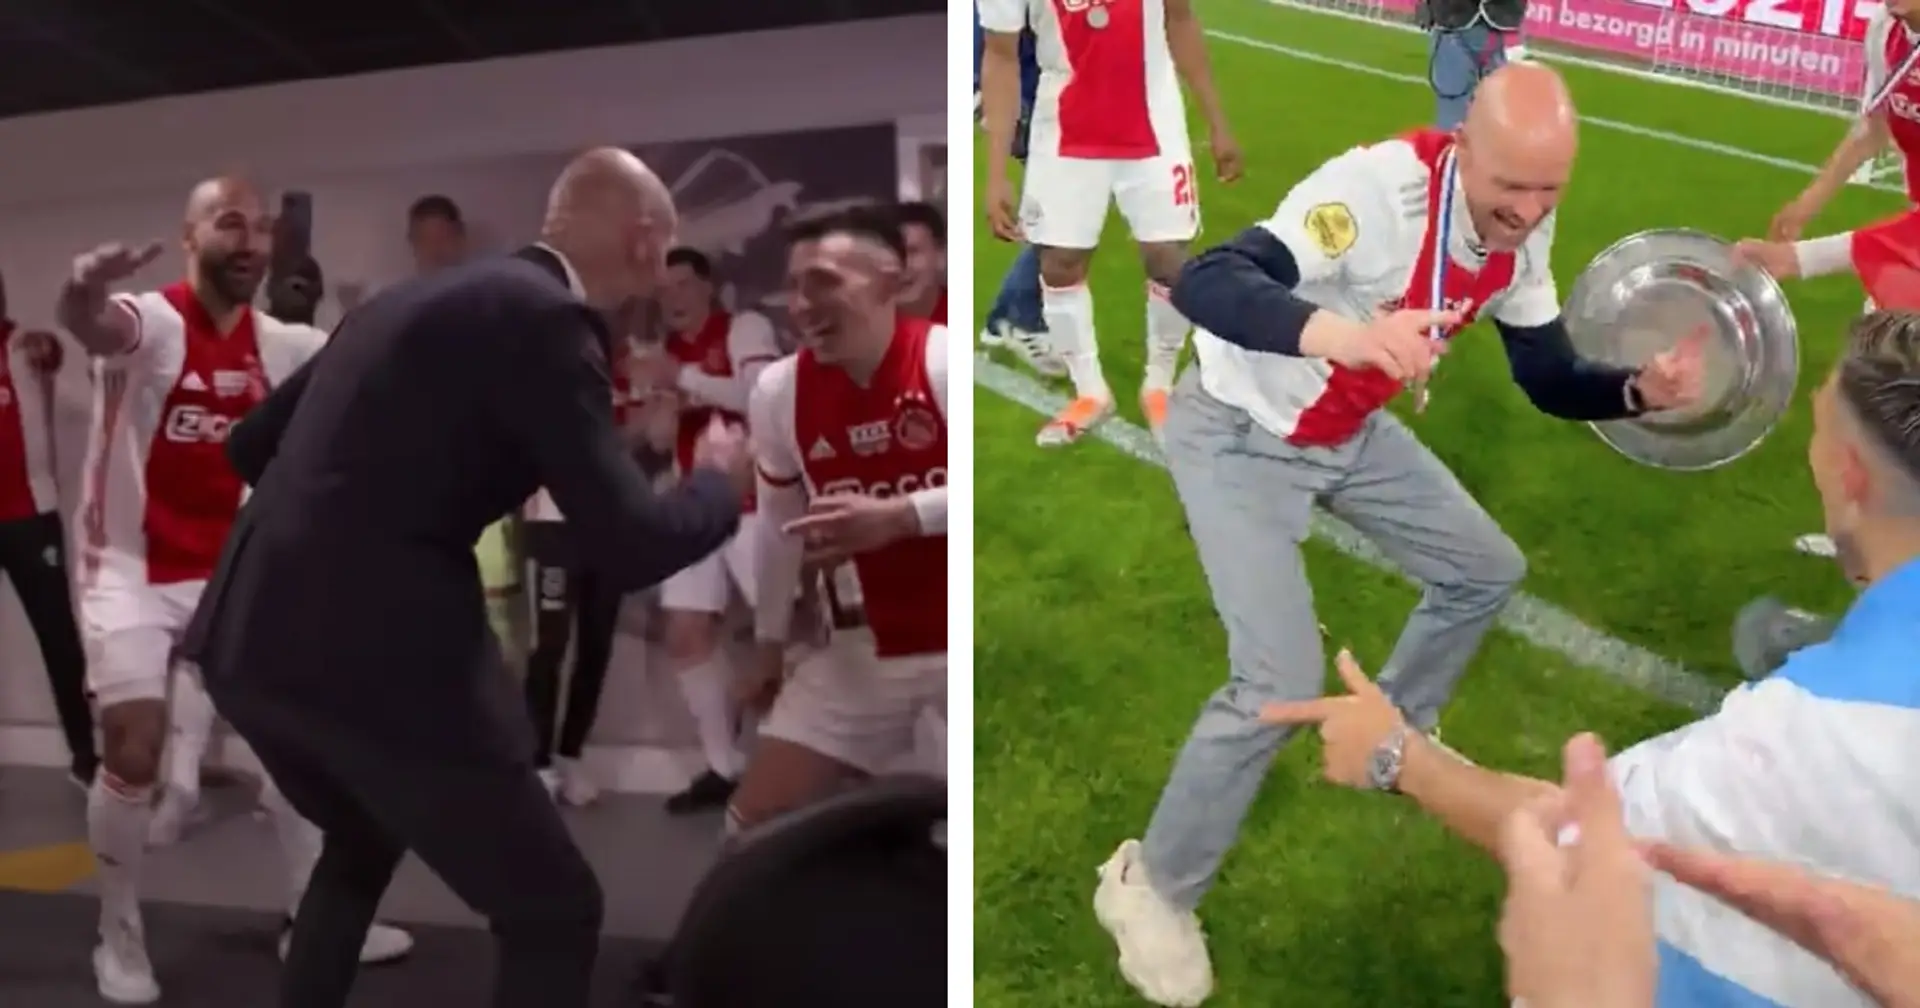 Spotted: Ten Hag shows off signature dance moves once again during Ajax trophy celebrations (video)